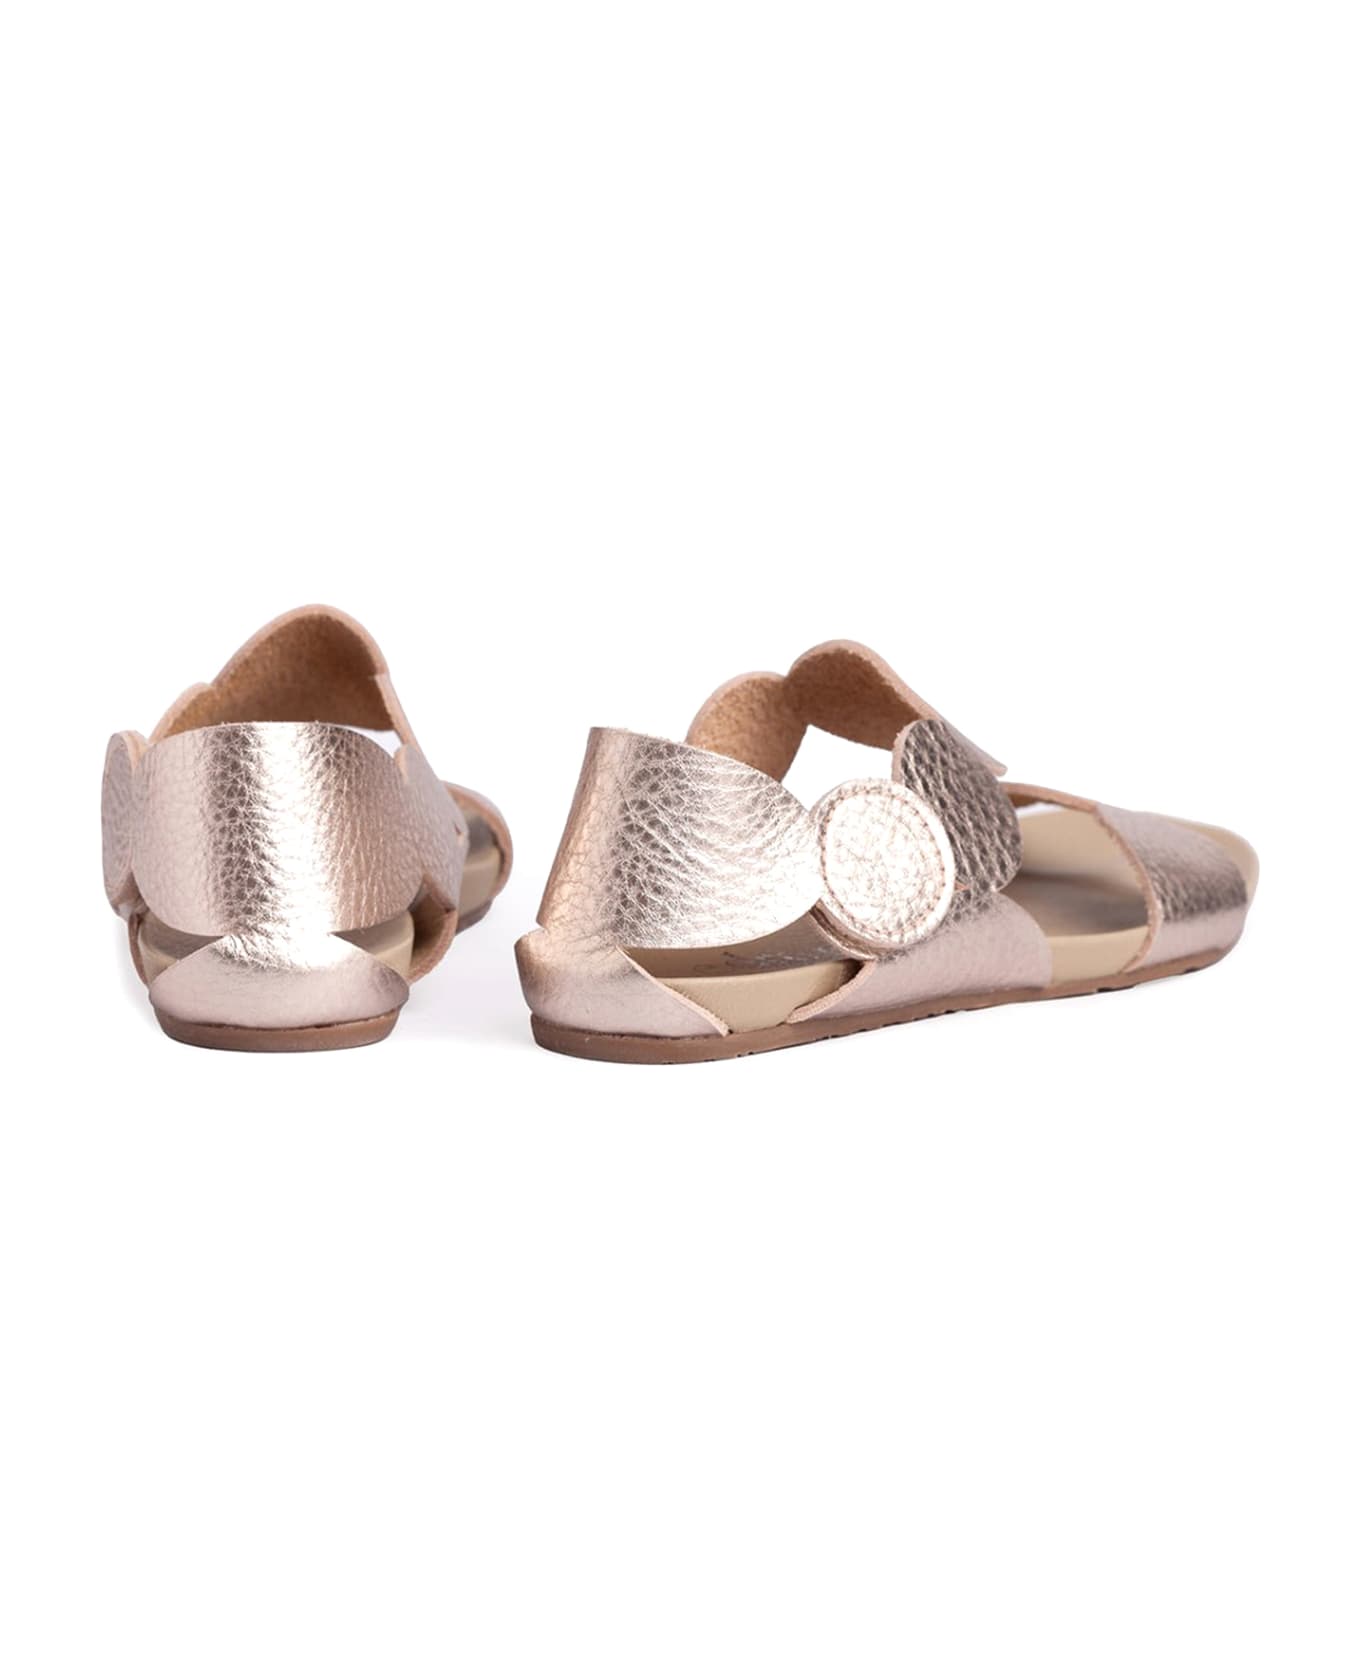 Pedro Garcia Jeanne Sandal In Laminated Grained Leather - SIROCCO サンダル